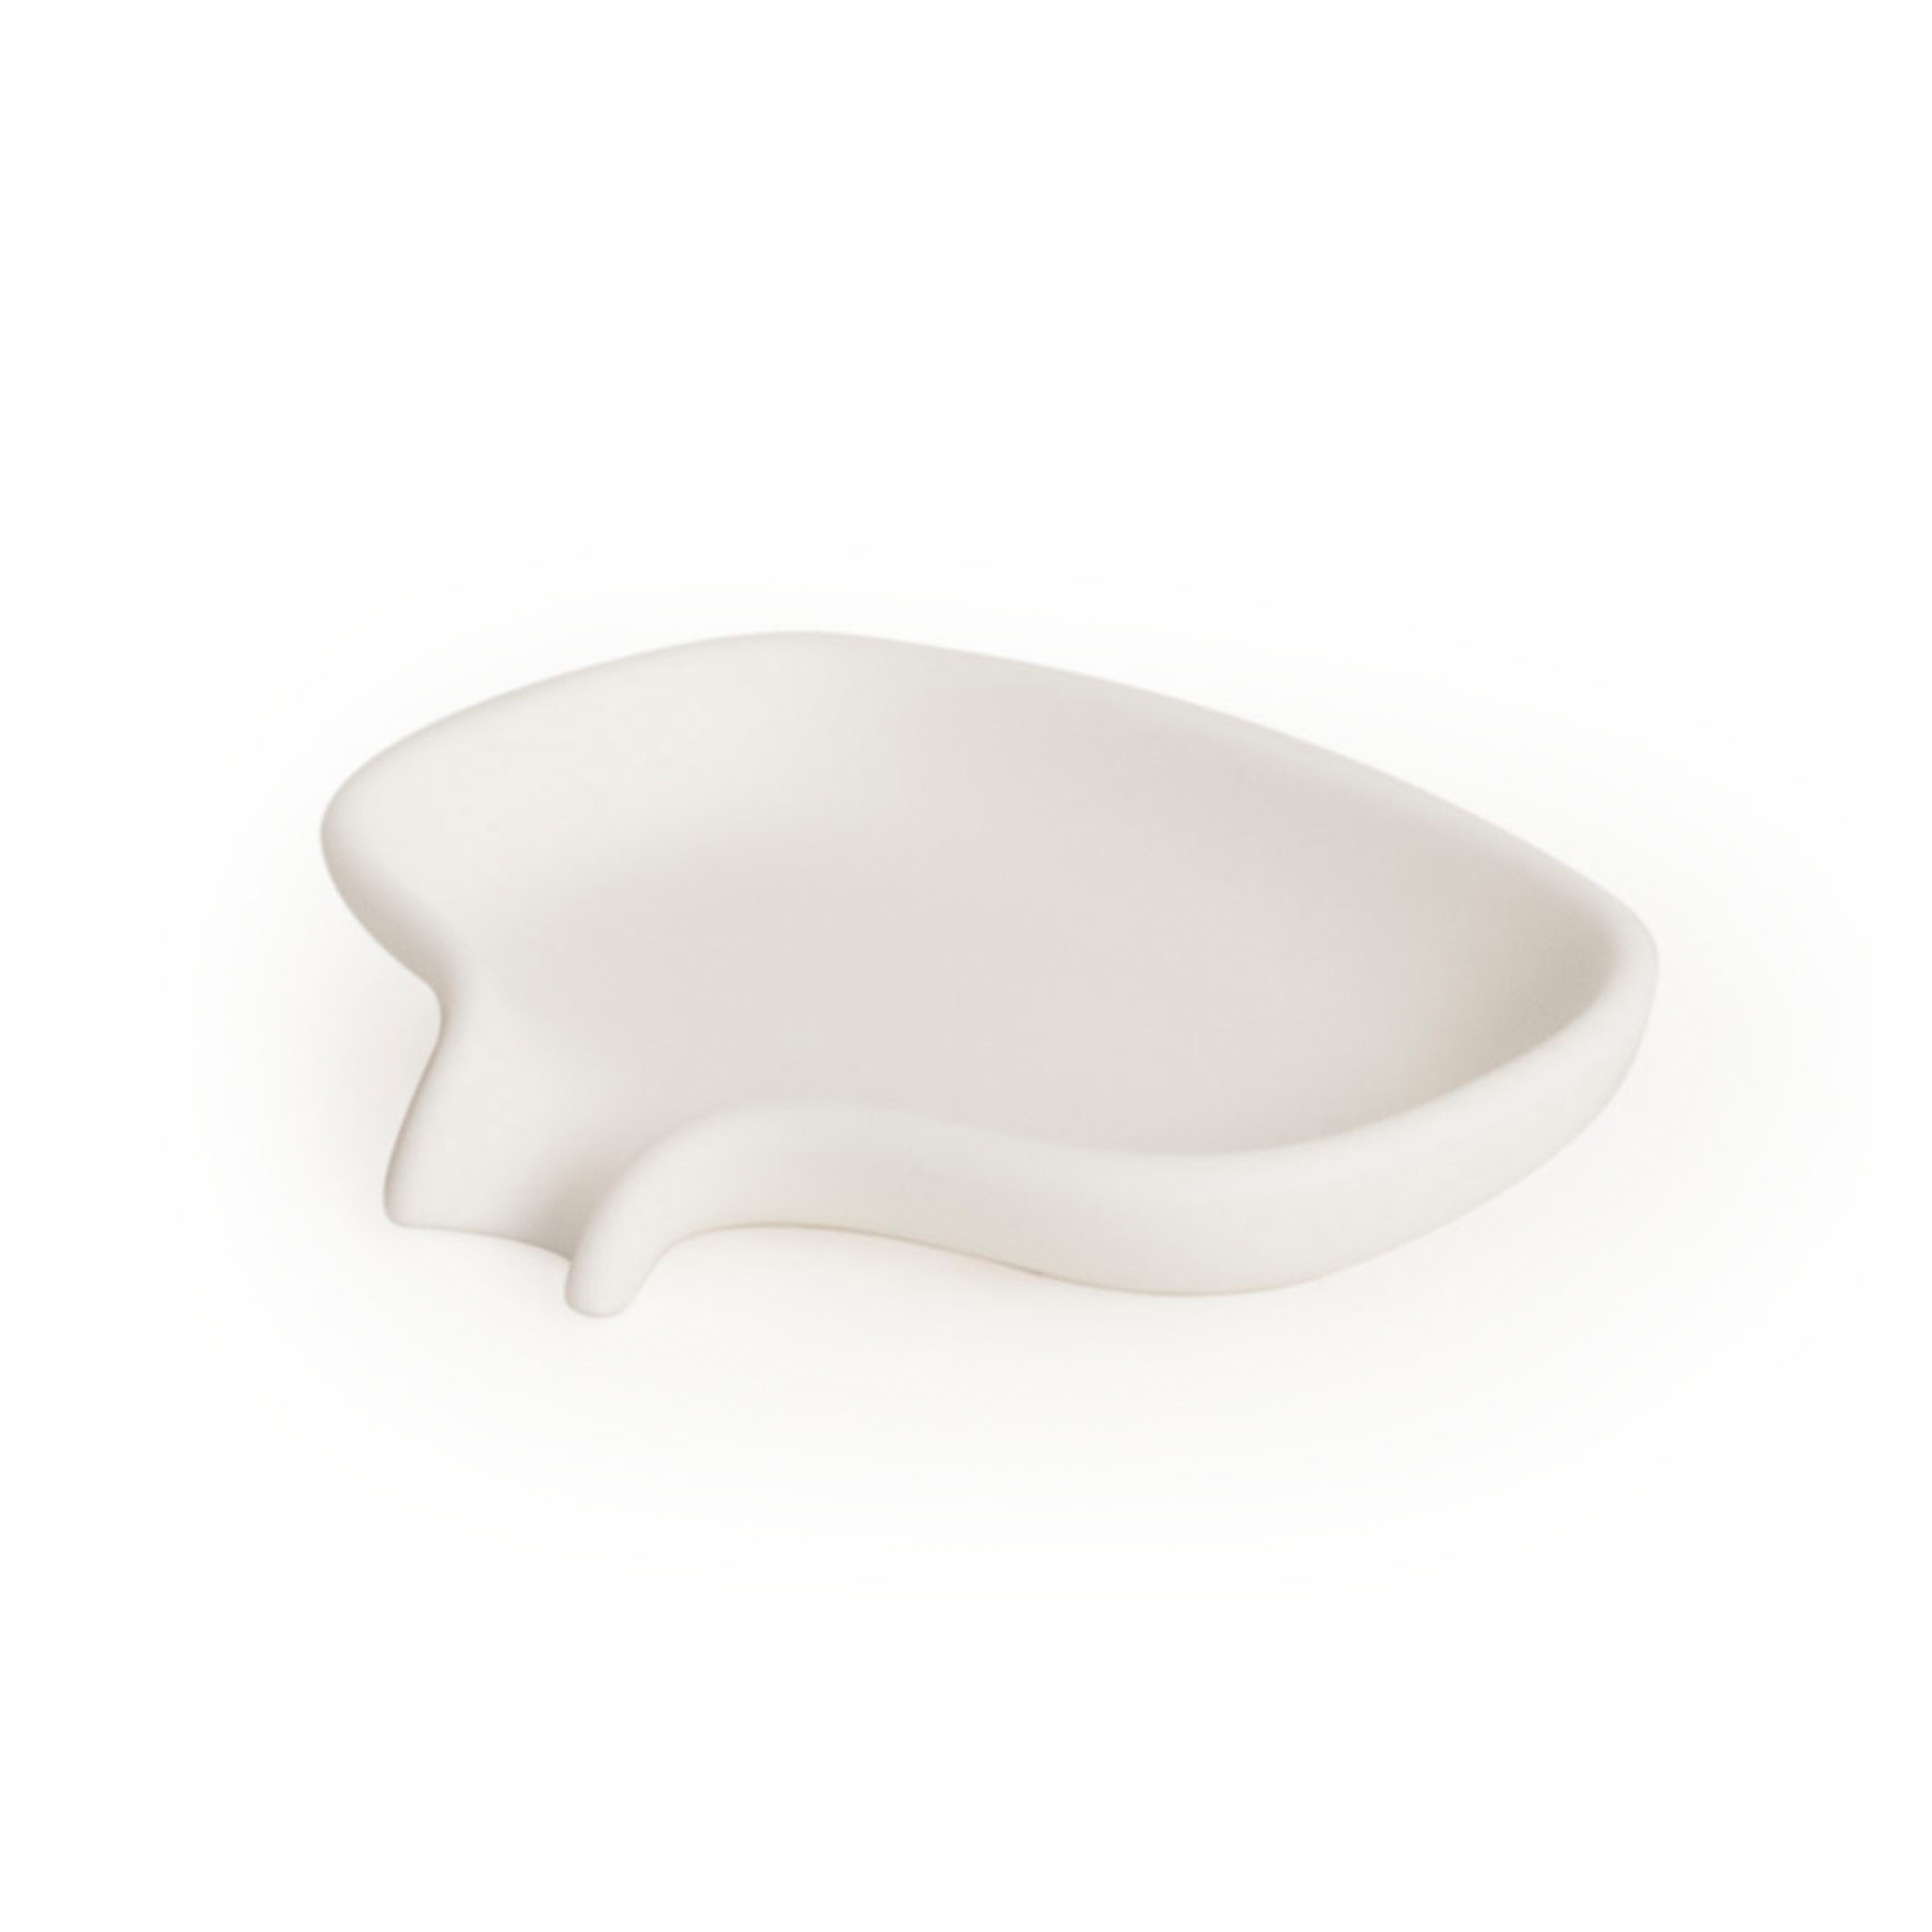 https://www.nordicnest.com/assets/blobs/bosign-soap-dish-with-drainage-spout-silicone-white/44051-02-01-57eb97db58.jpg